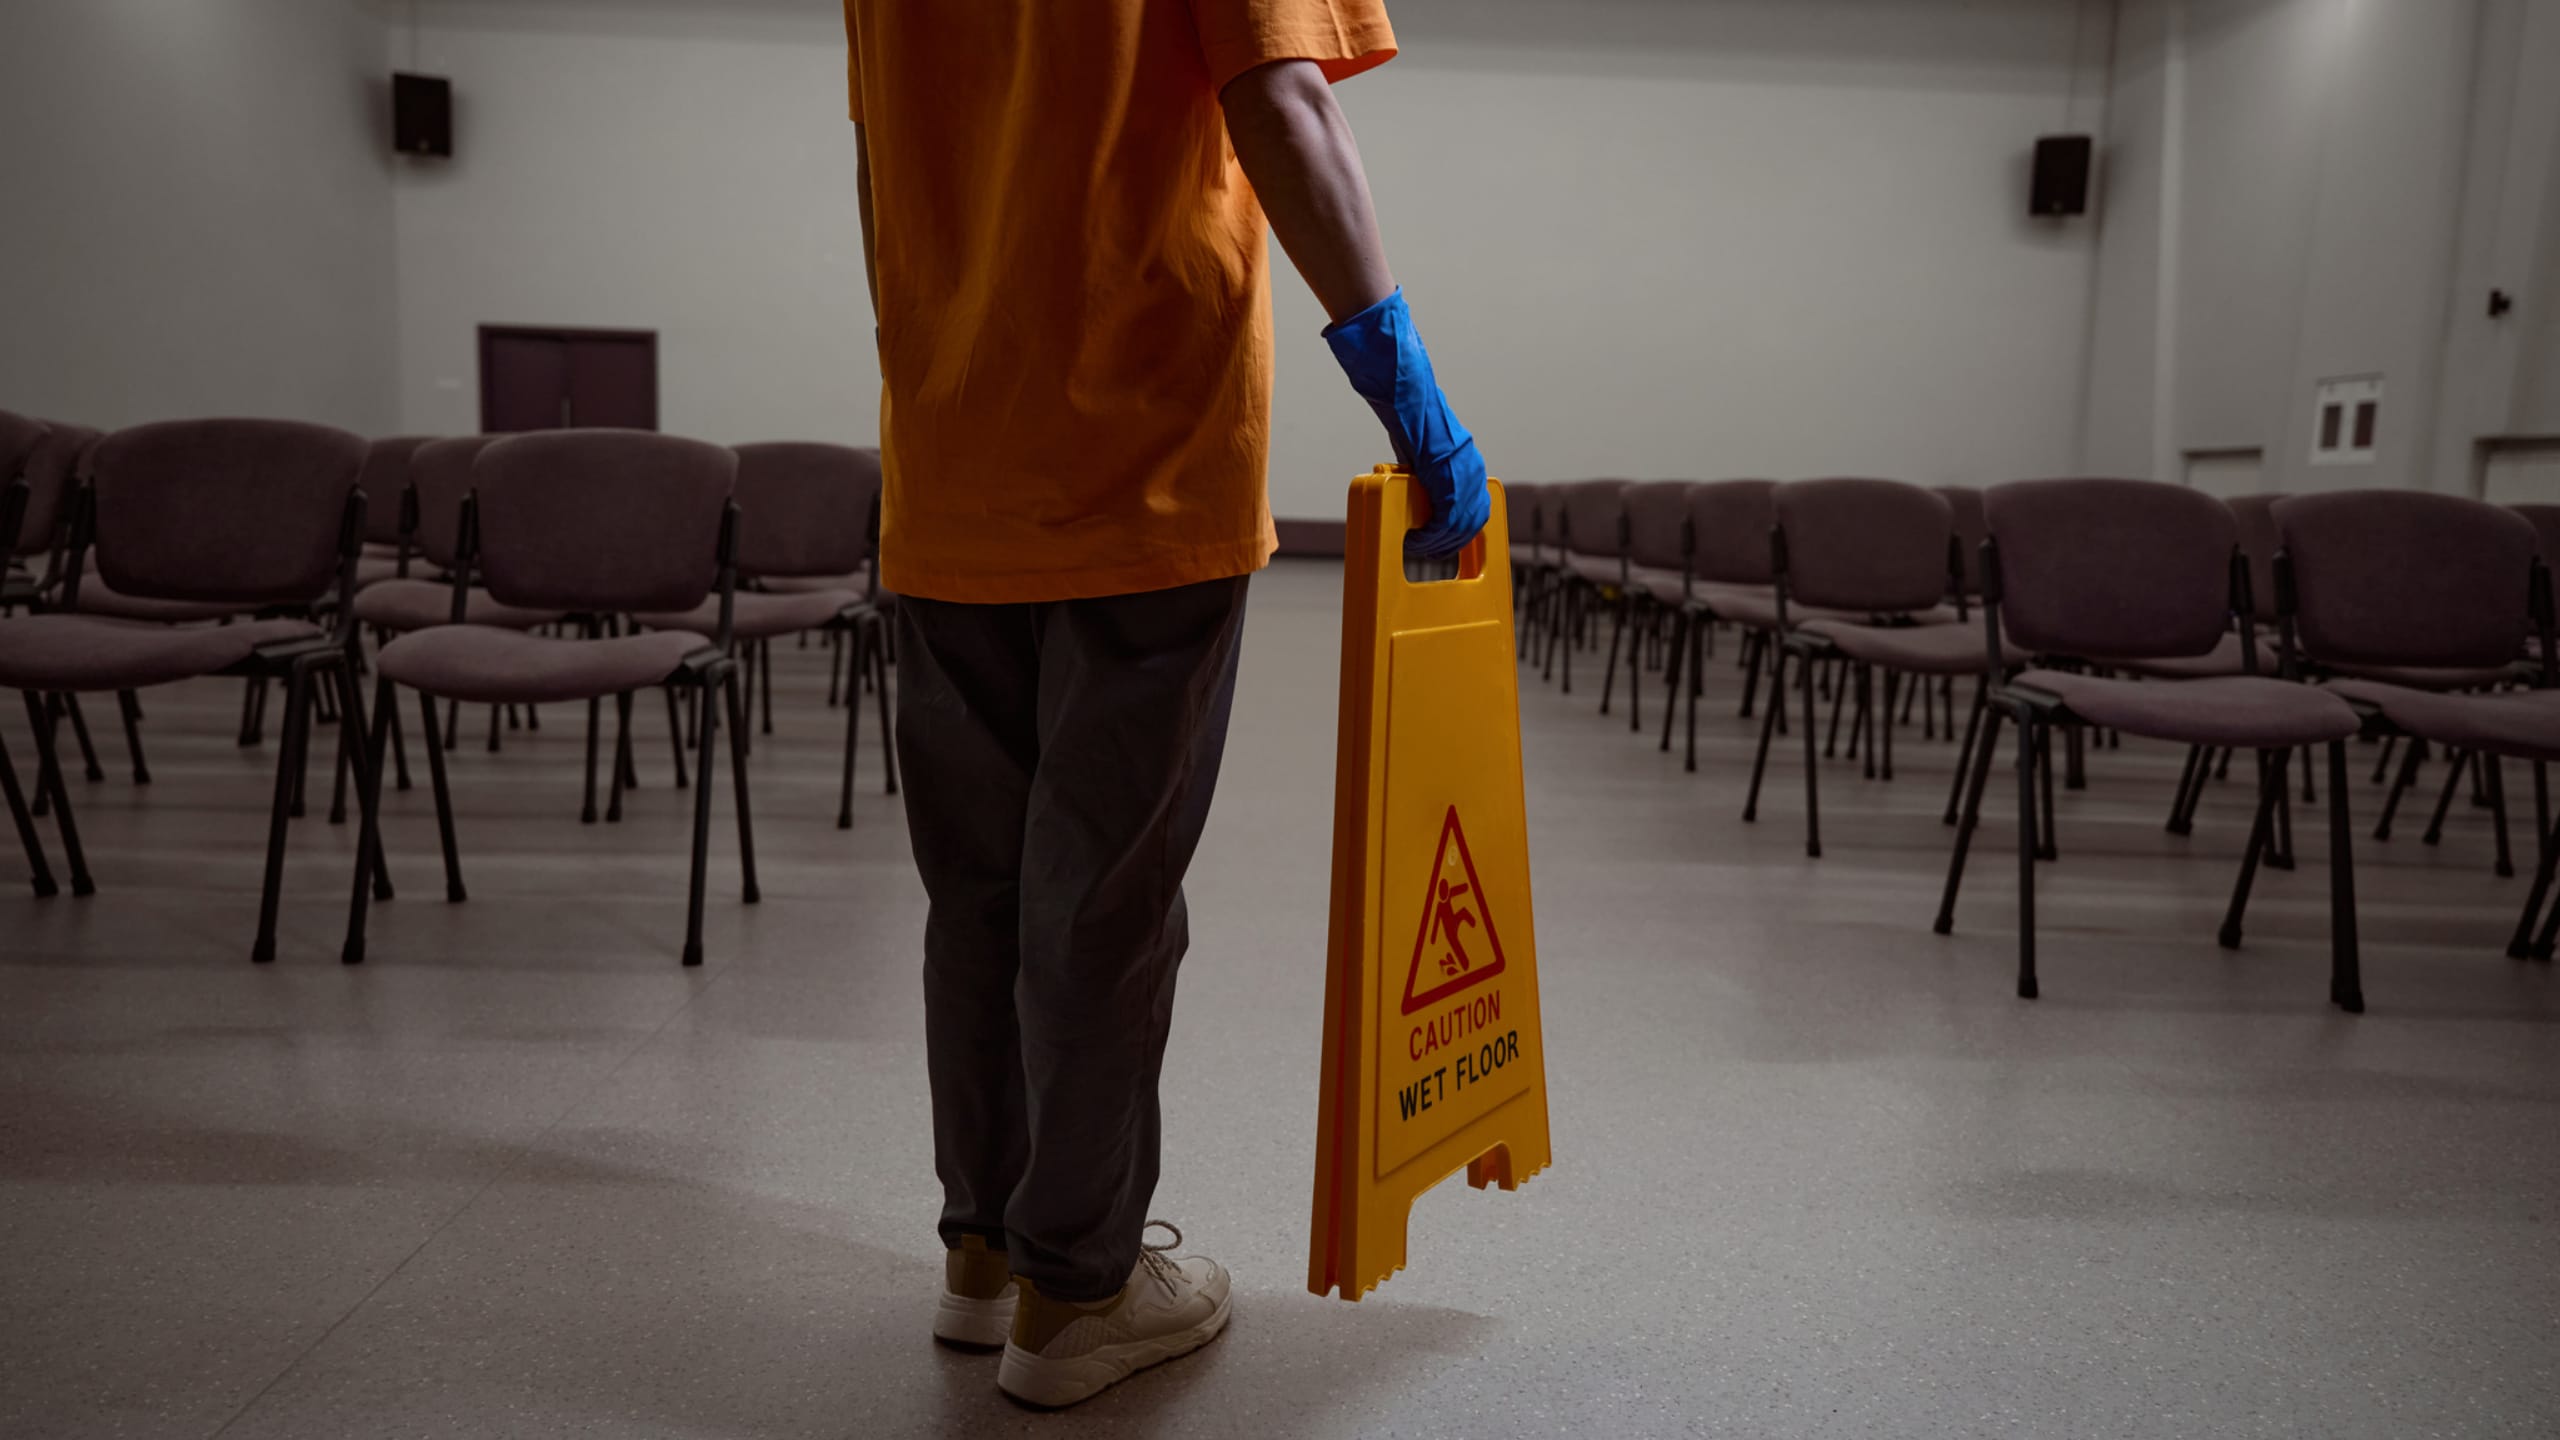 Best Practices for Maintaining Spotless, Sanitary Working Spaces with Quality Commercial Cleaners